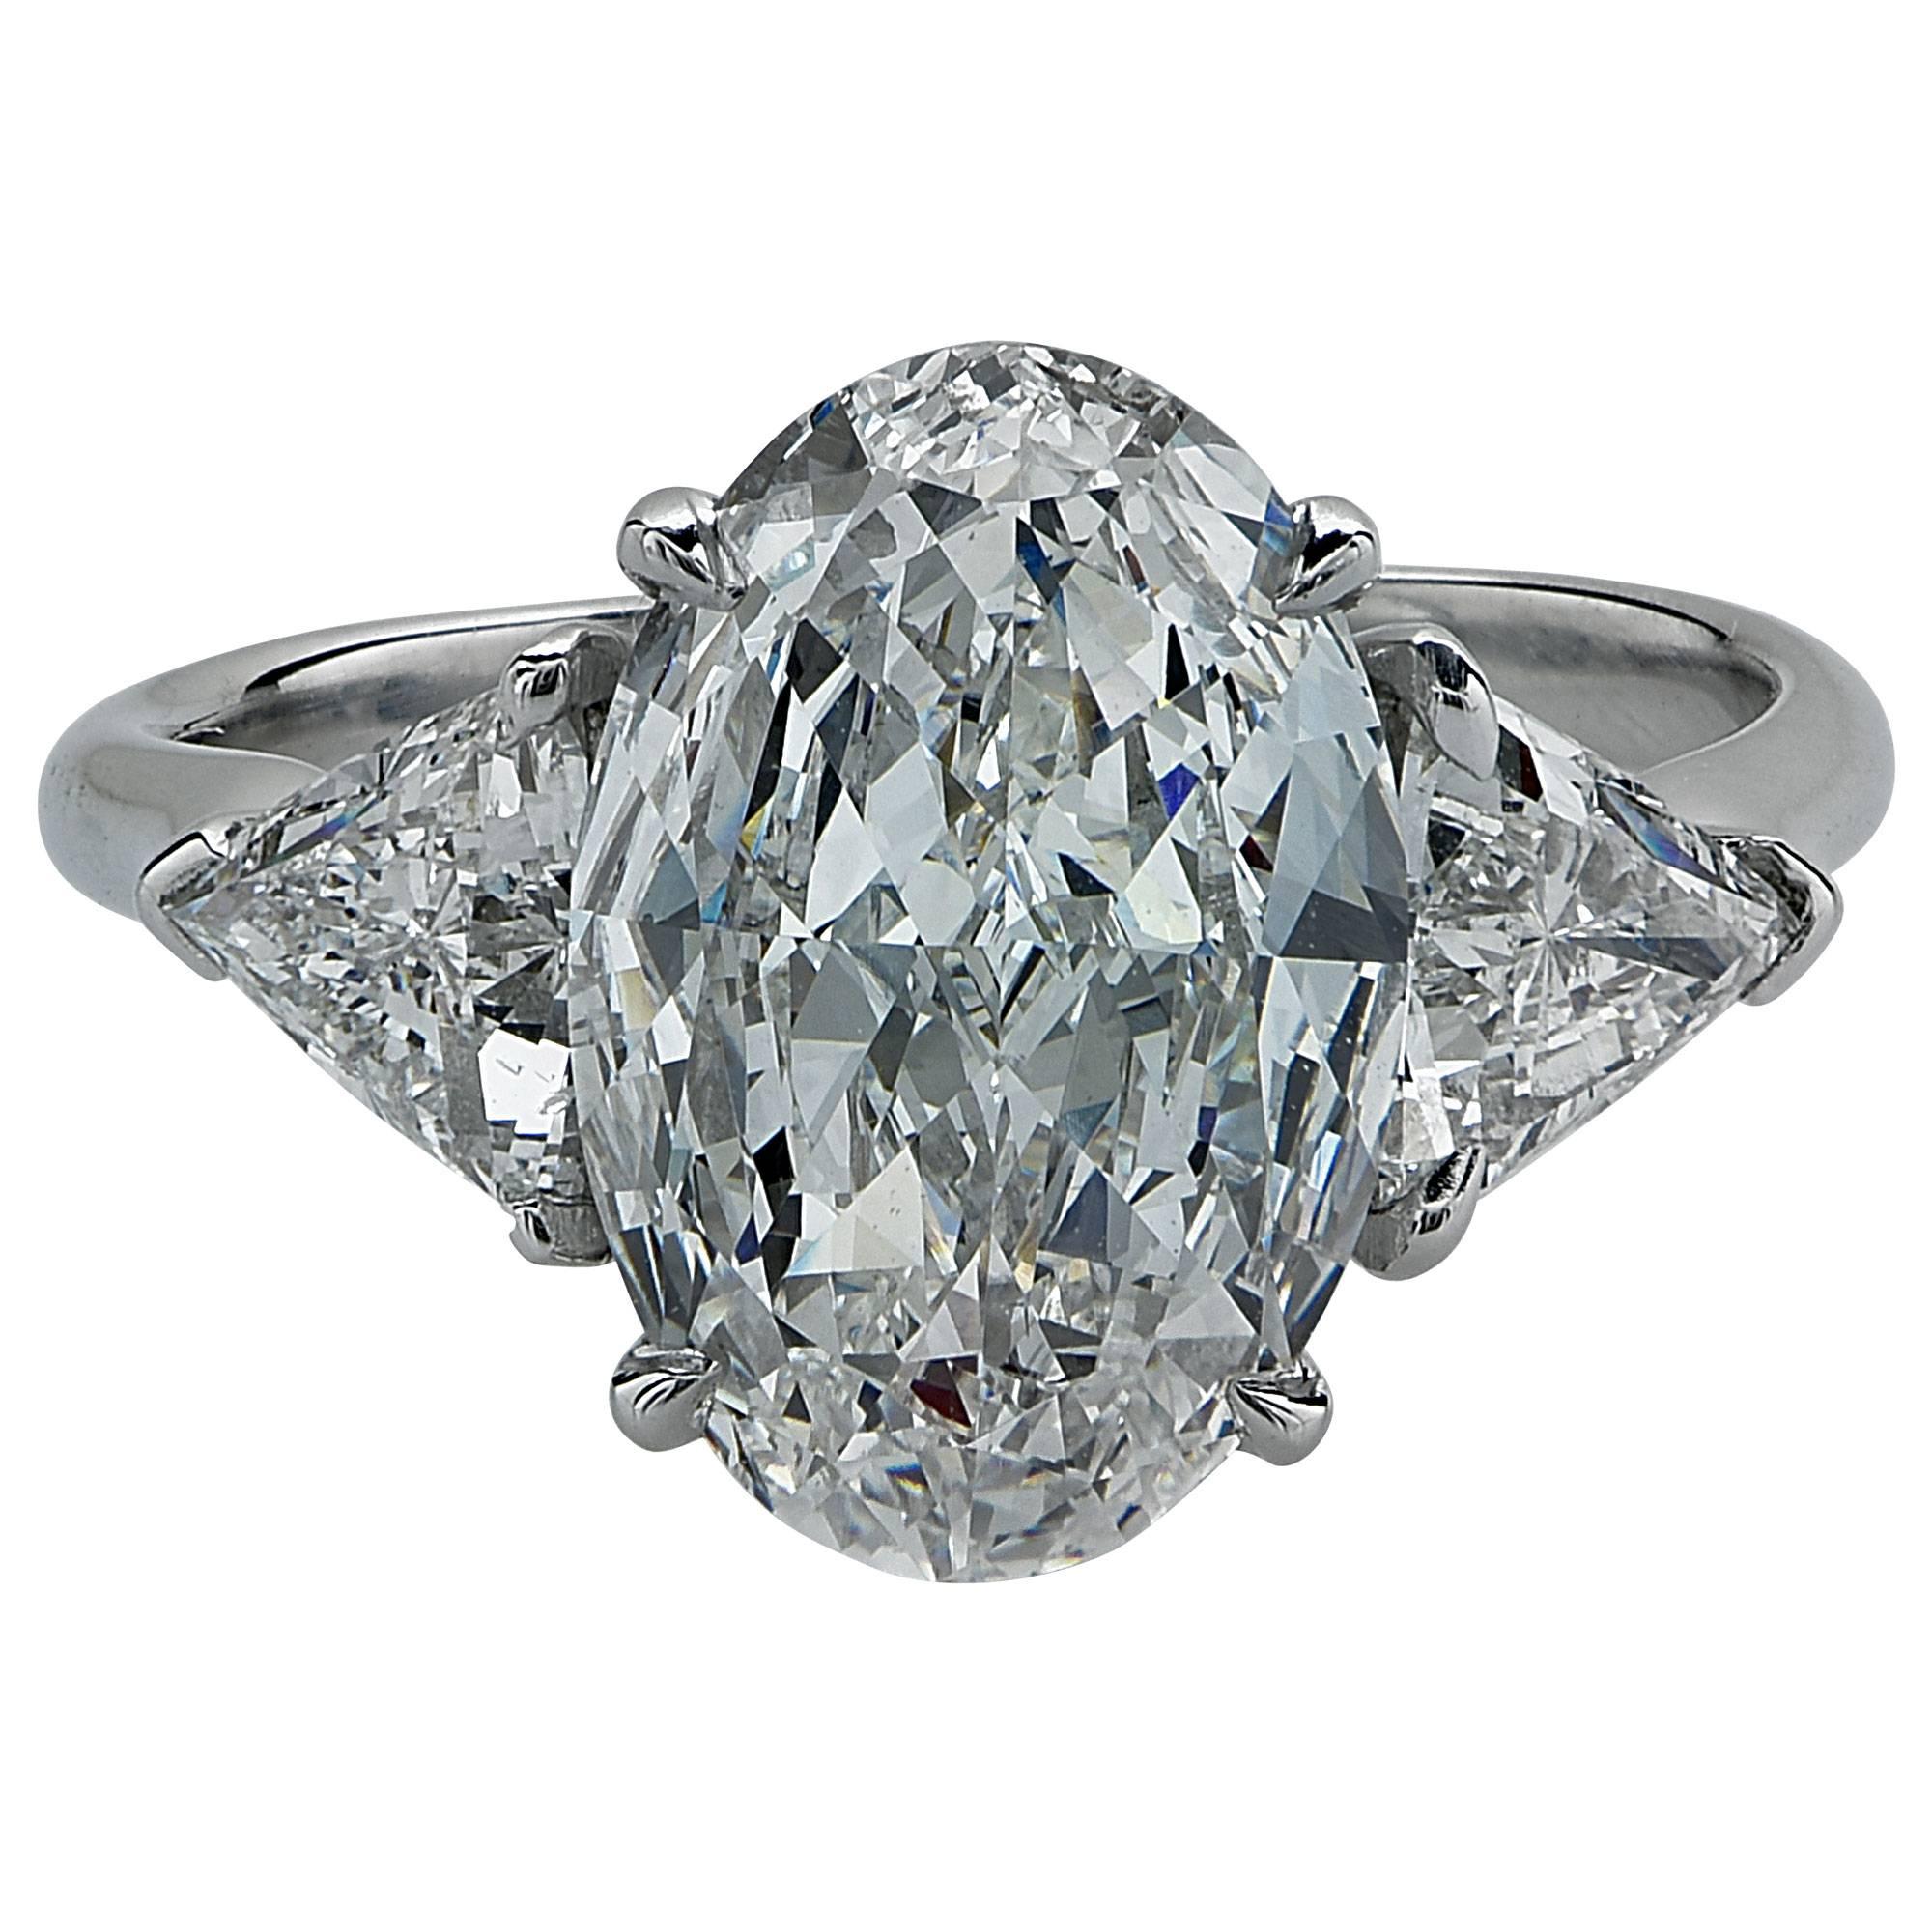 Platinum ring containing a 2.82ct, E color, VVS2 clarity, gorgeous oval diamond flanked by 2 trilliant cut diamonds weighing 1.04ct, E color, VS clarity.

Ring size: 6 (can be sized up or down free of charge)
Metal weight:

This diamond